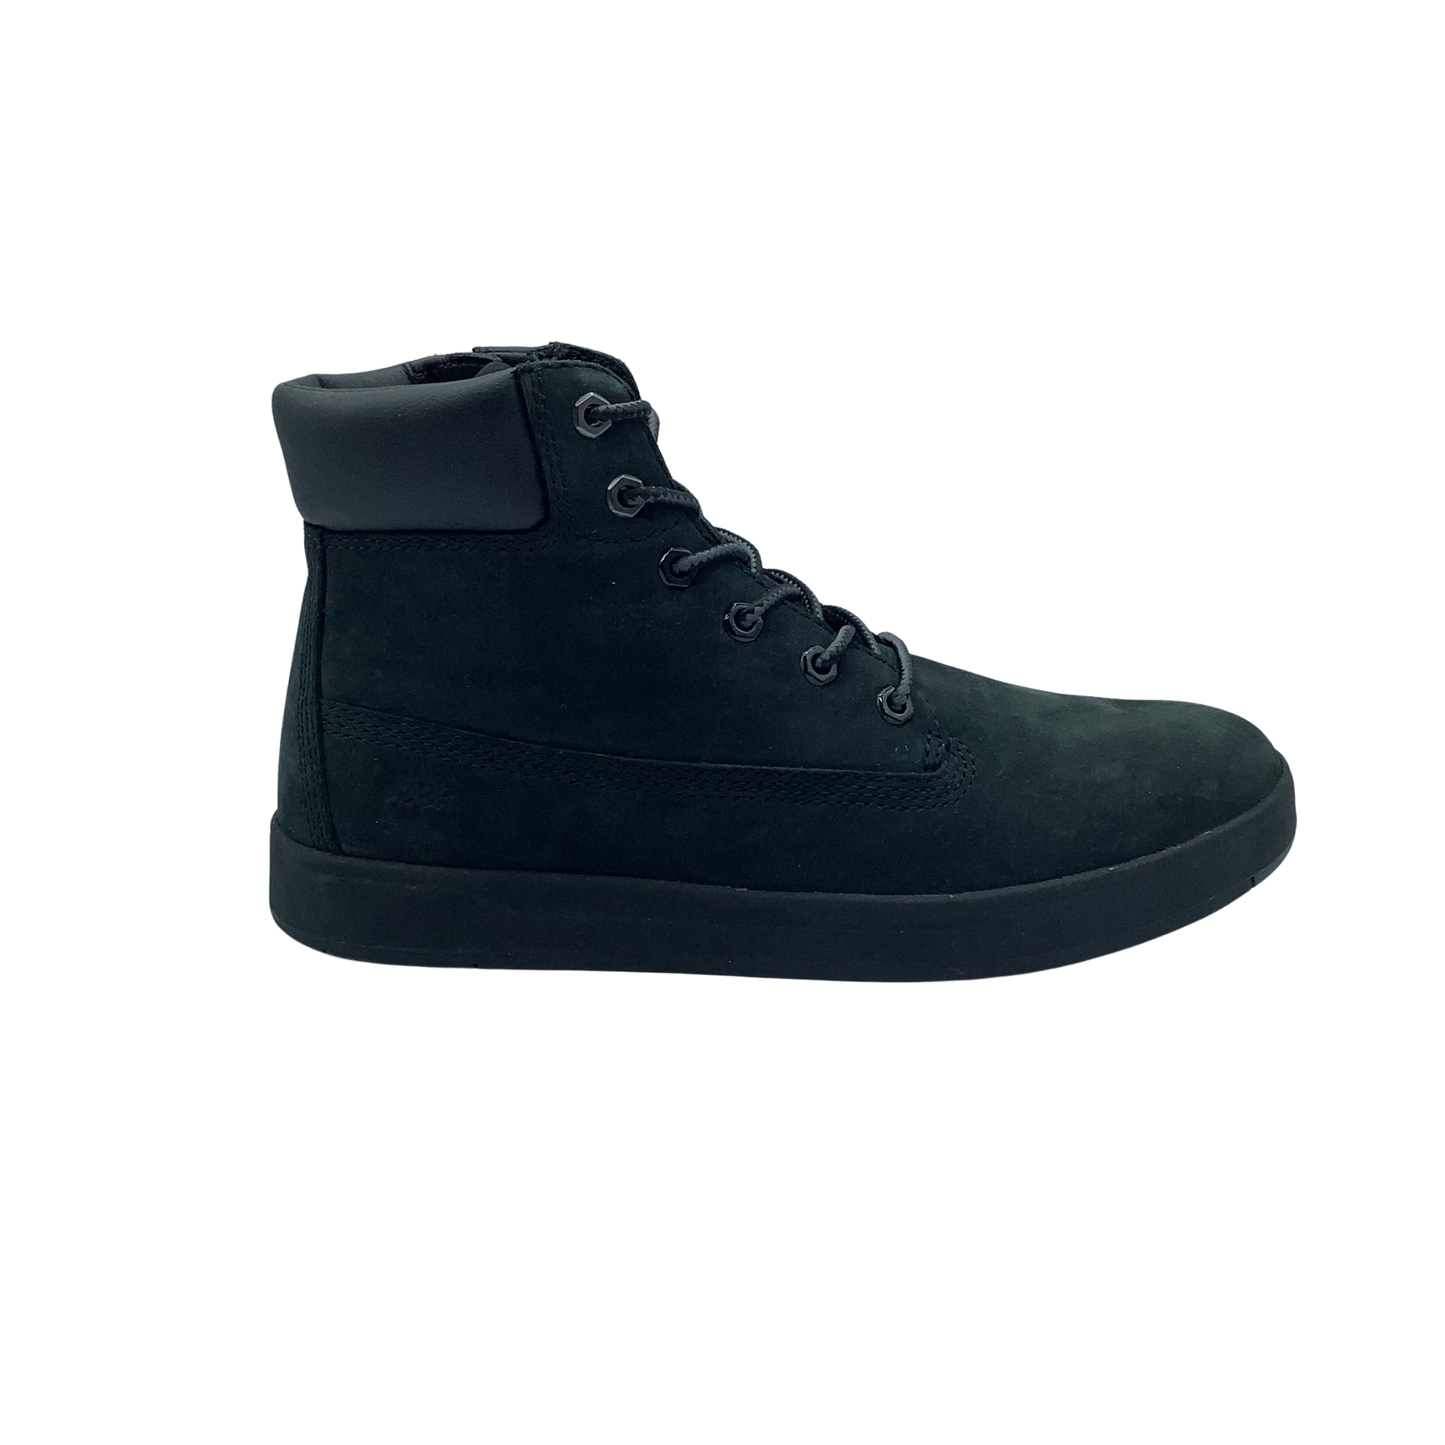 Timberland DAVIS SQUARE 6 IN SIDE ZIP BOOT